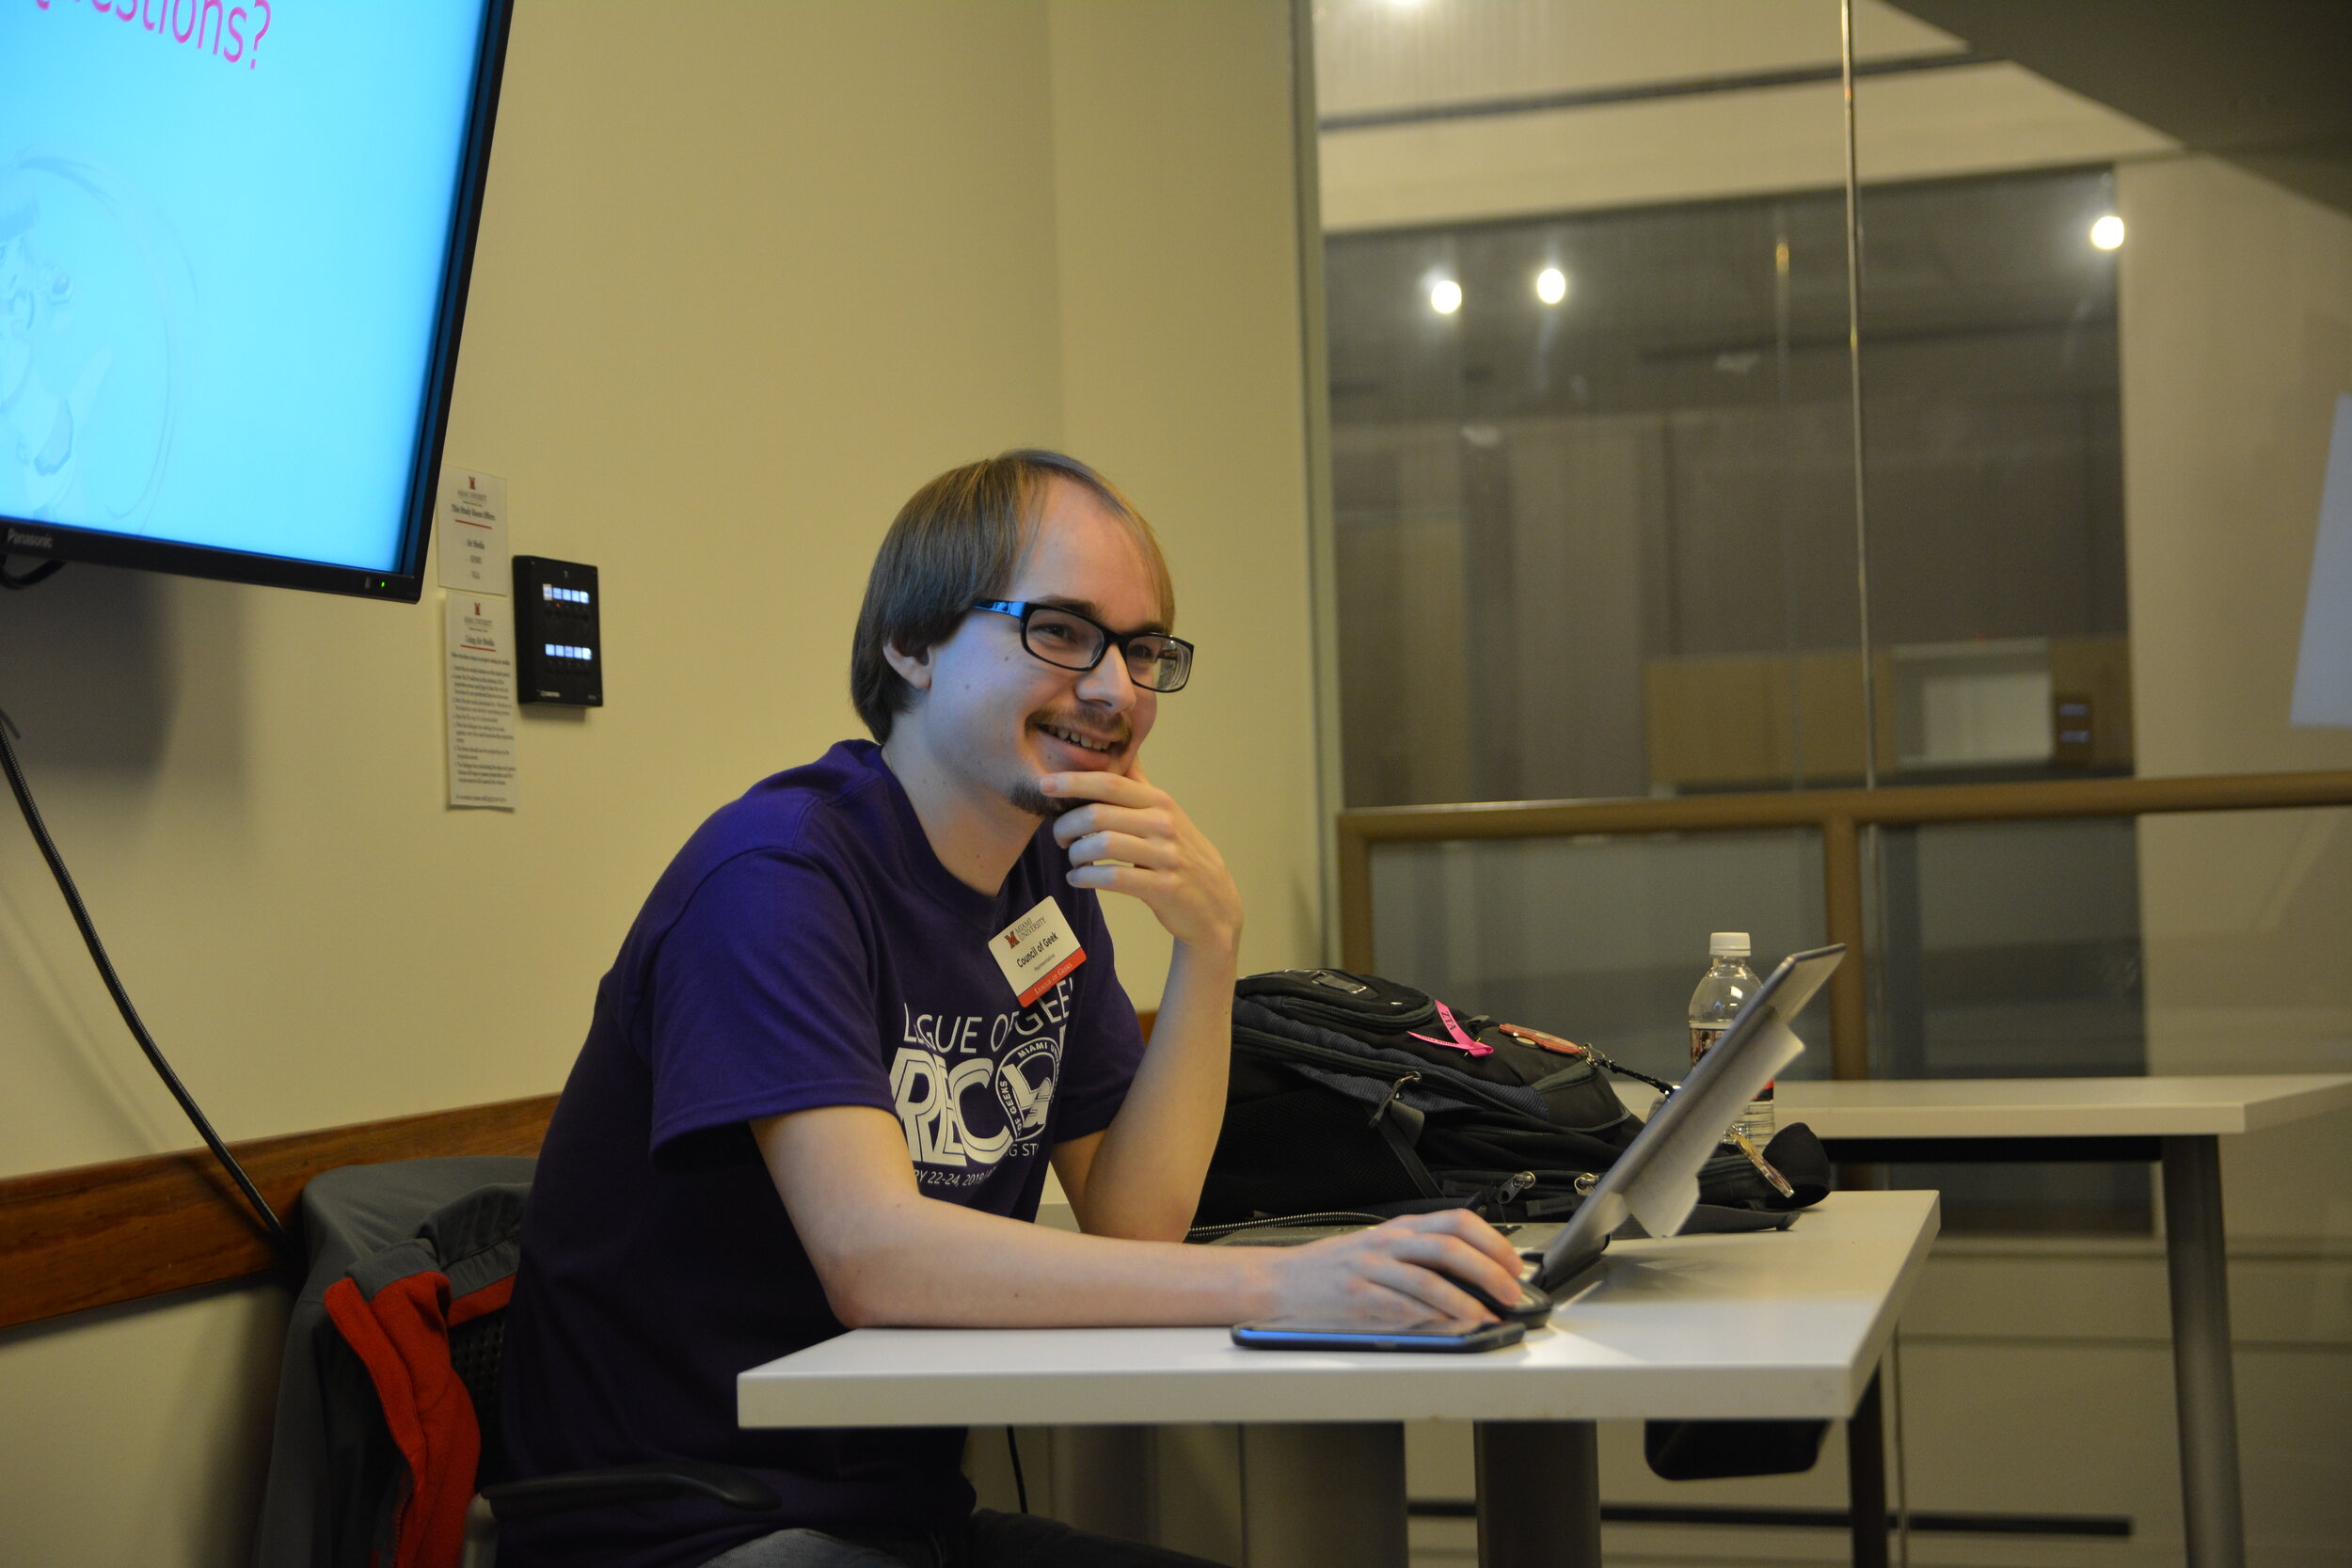 A person in a RECON team shirt sitting in front of a computer on a desk facing the right smiling at something off camera.